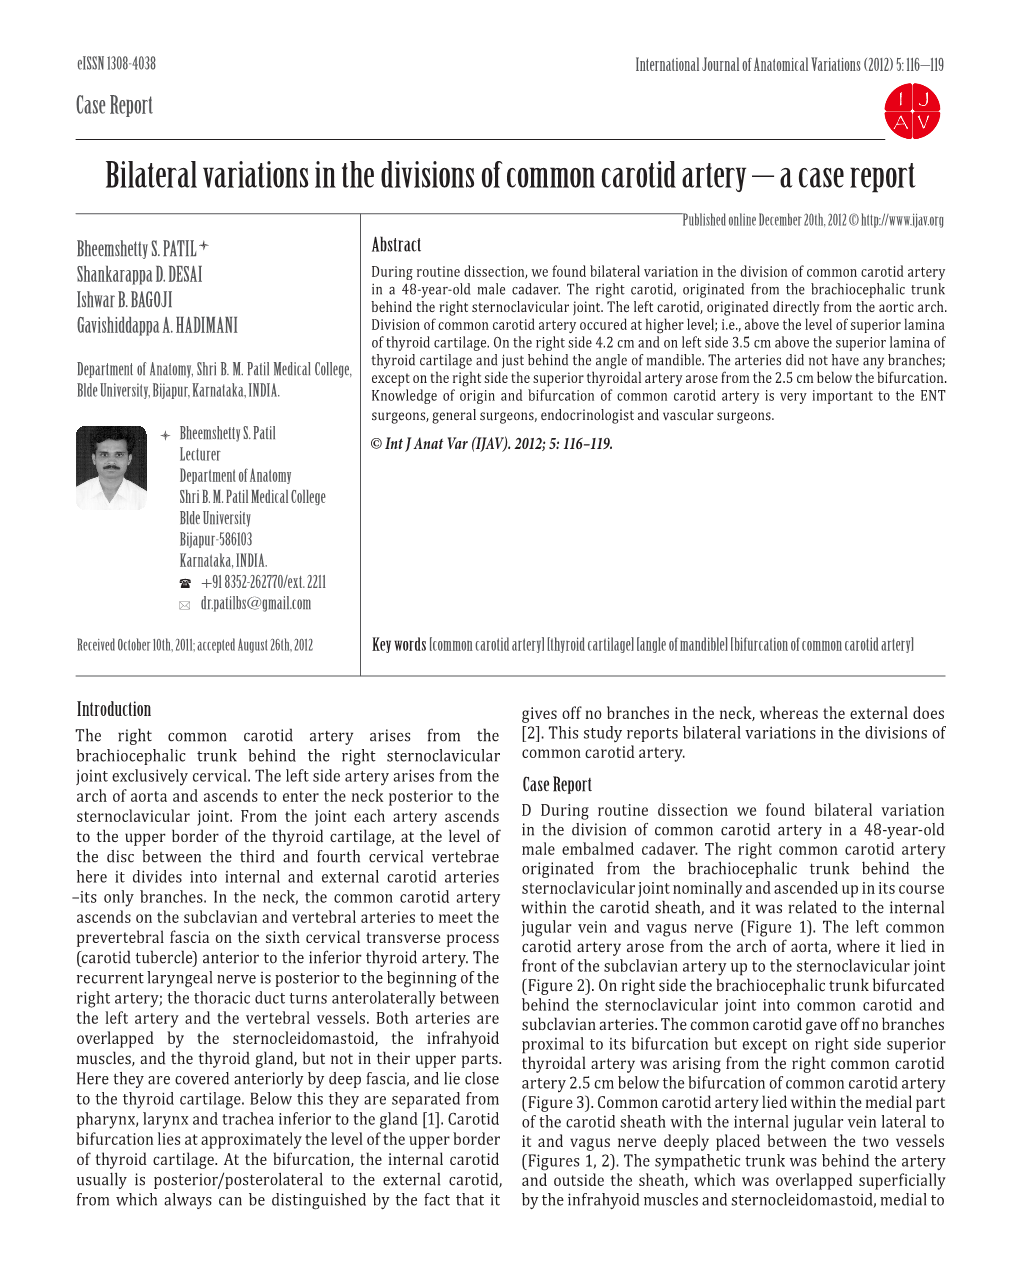 Bilateral Variations in the Divisions of Common Carotid Artery – a Case Report